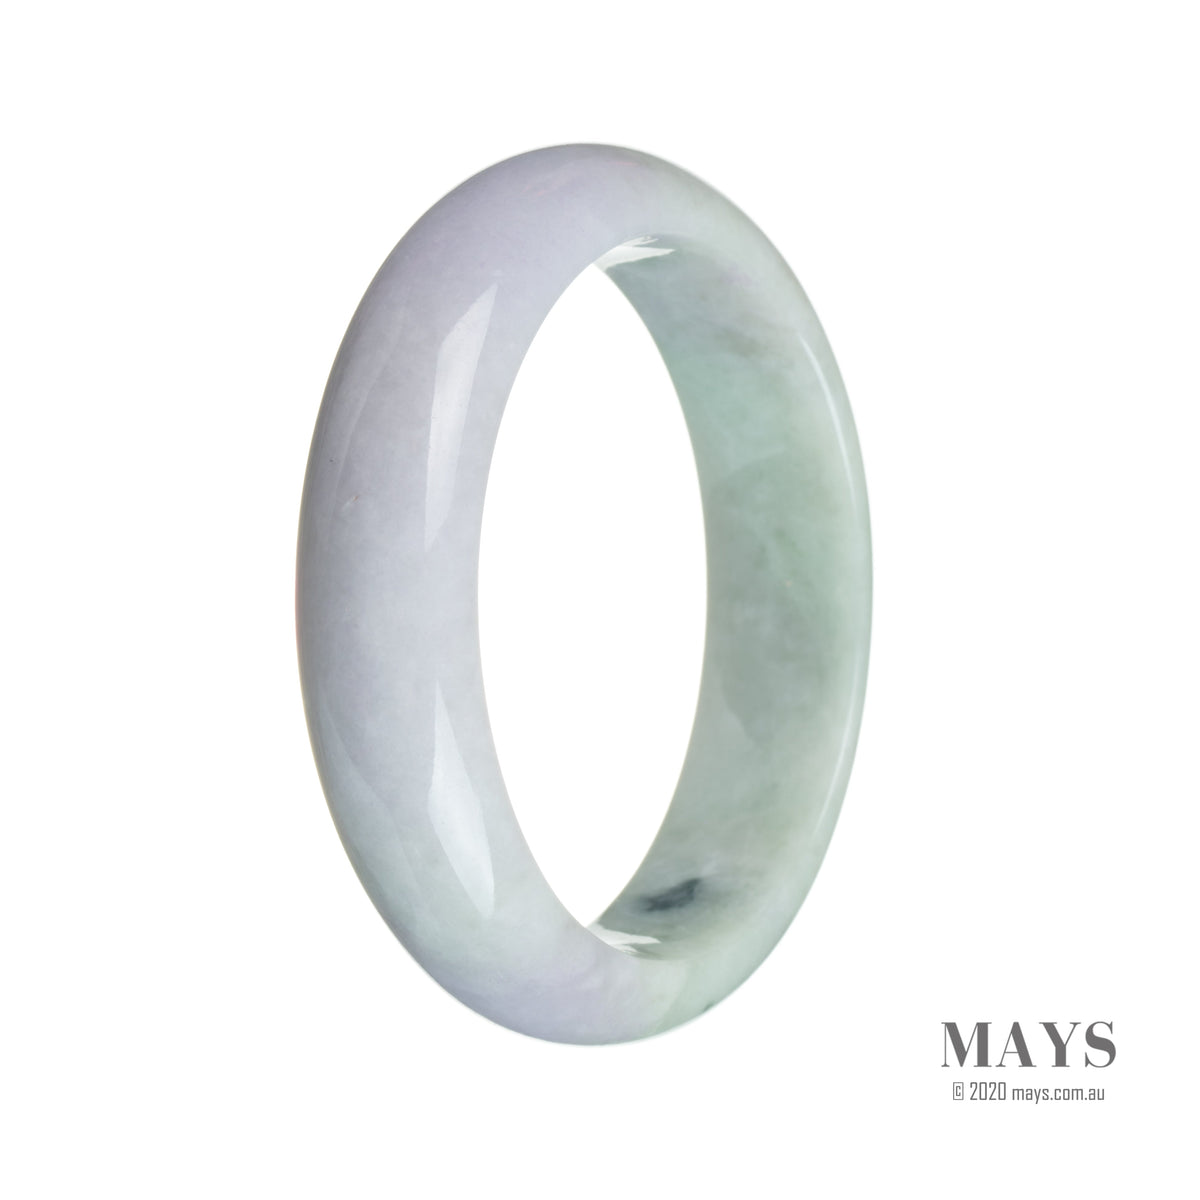 A beautiful bangle made of real untreated lavender with green jade, featuring a semi-round shape. Perfect for adding a touch of natural elegance to any outfit.